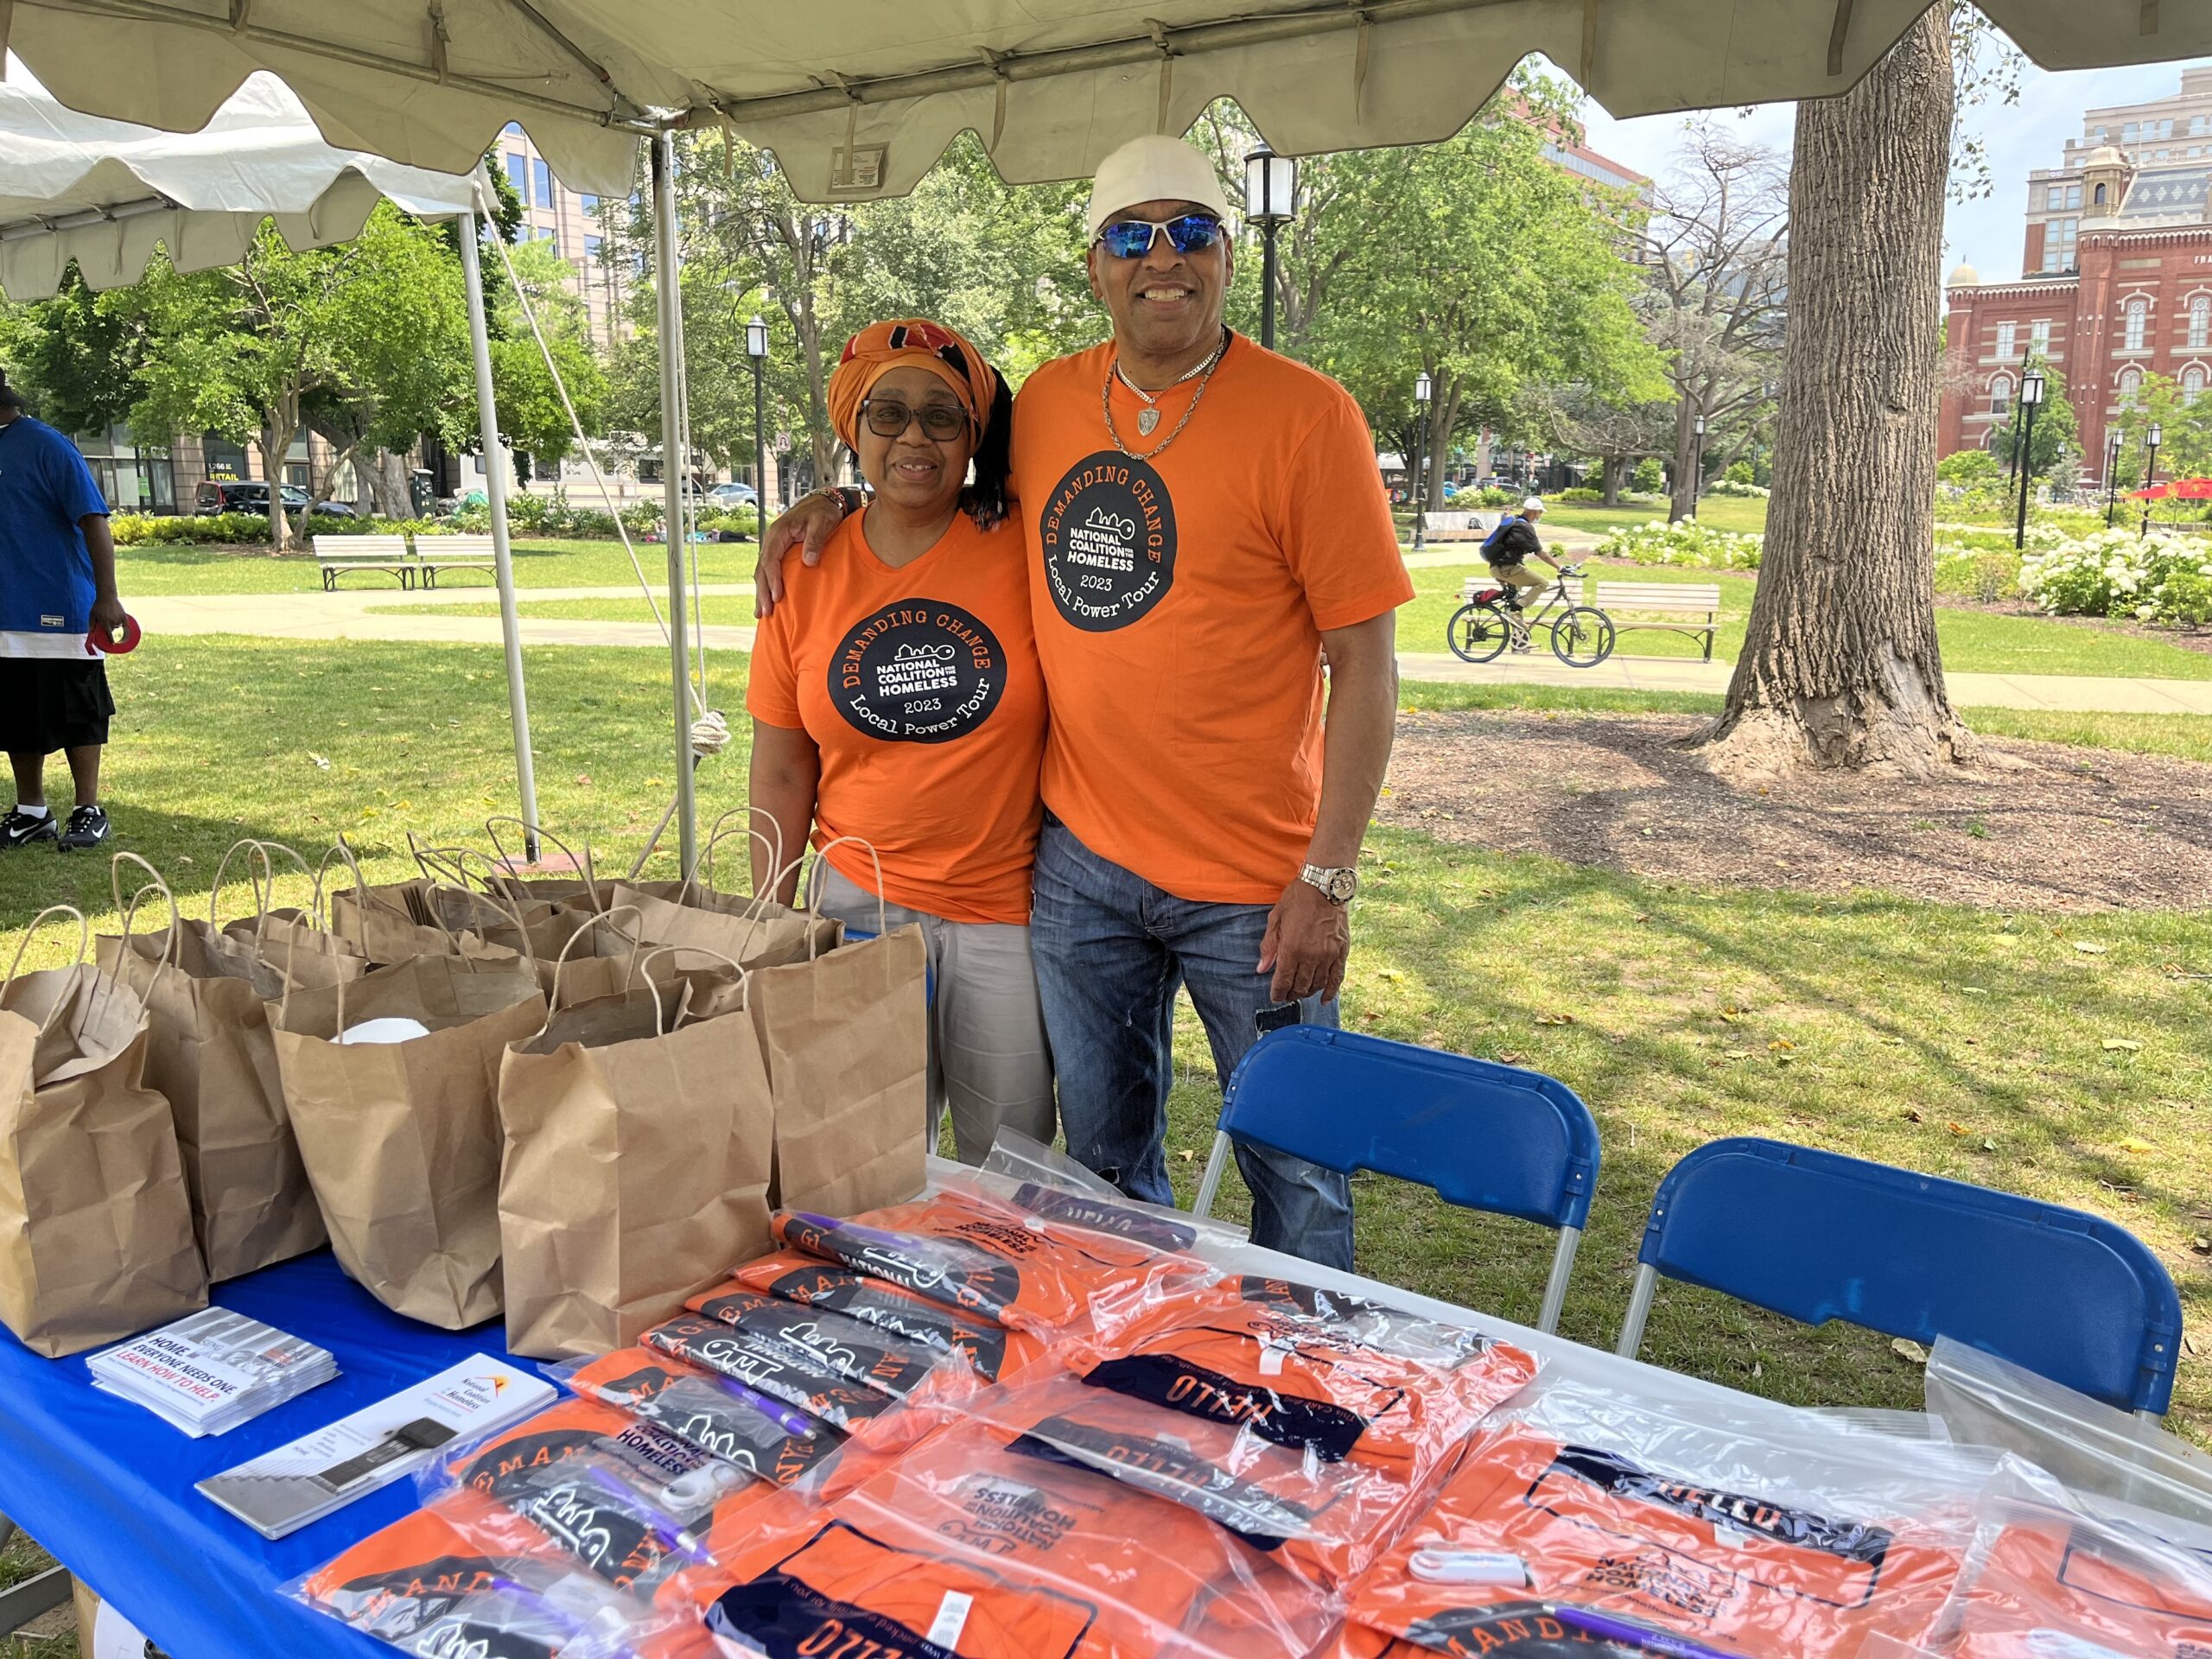 Two people stand side-by-side in orange shirts in front of a table with fliers and gift bags.